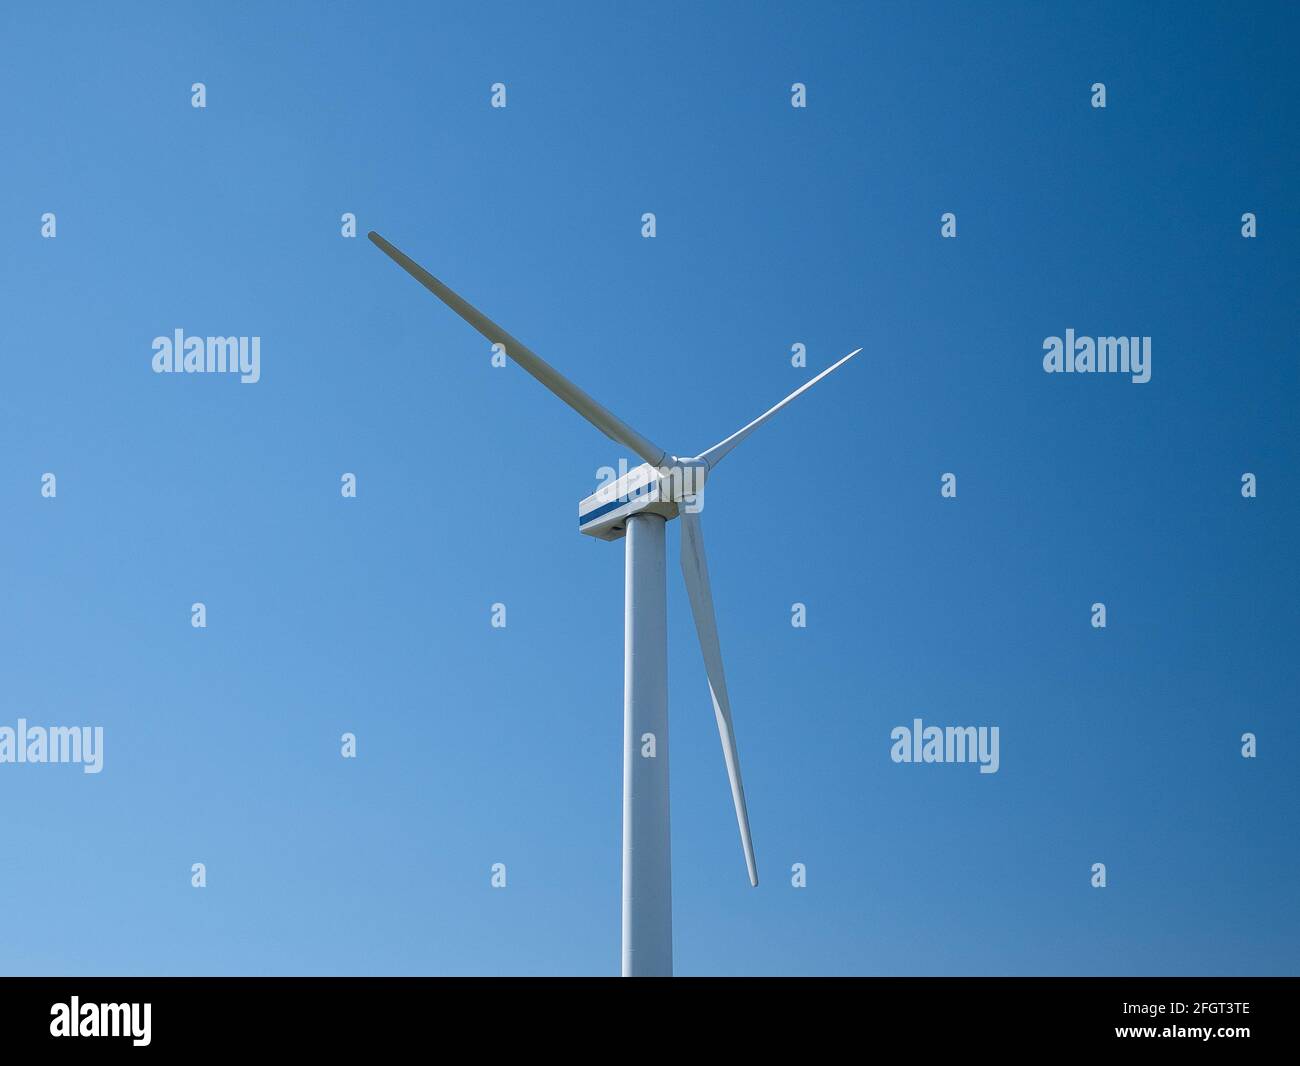 A wind turbine near Workington on the Solway Coast, Cumbria, UK. Taken on a sunny day with a clear blue sky. Stock Photo